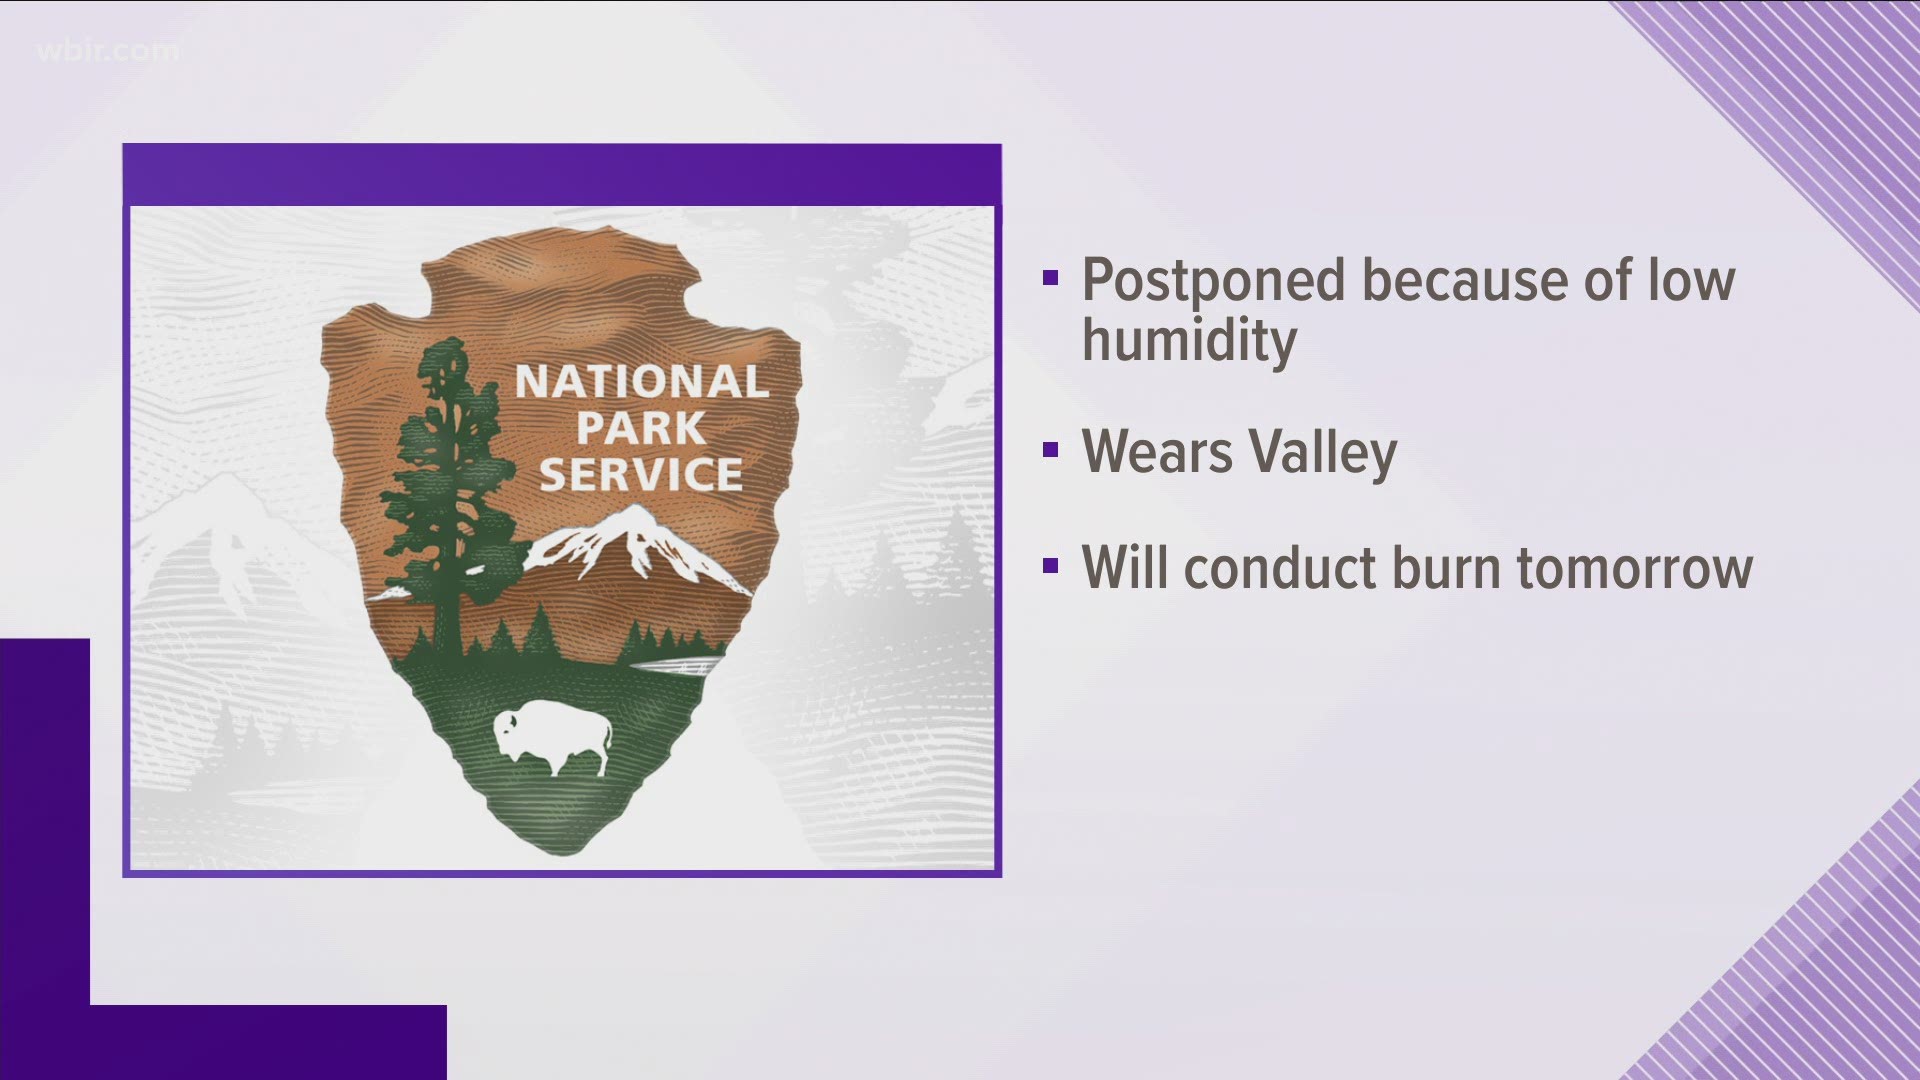 Officials made the decision to cancel the burn due to dry weather conditions.